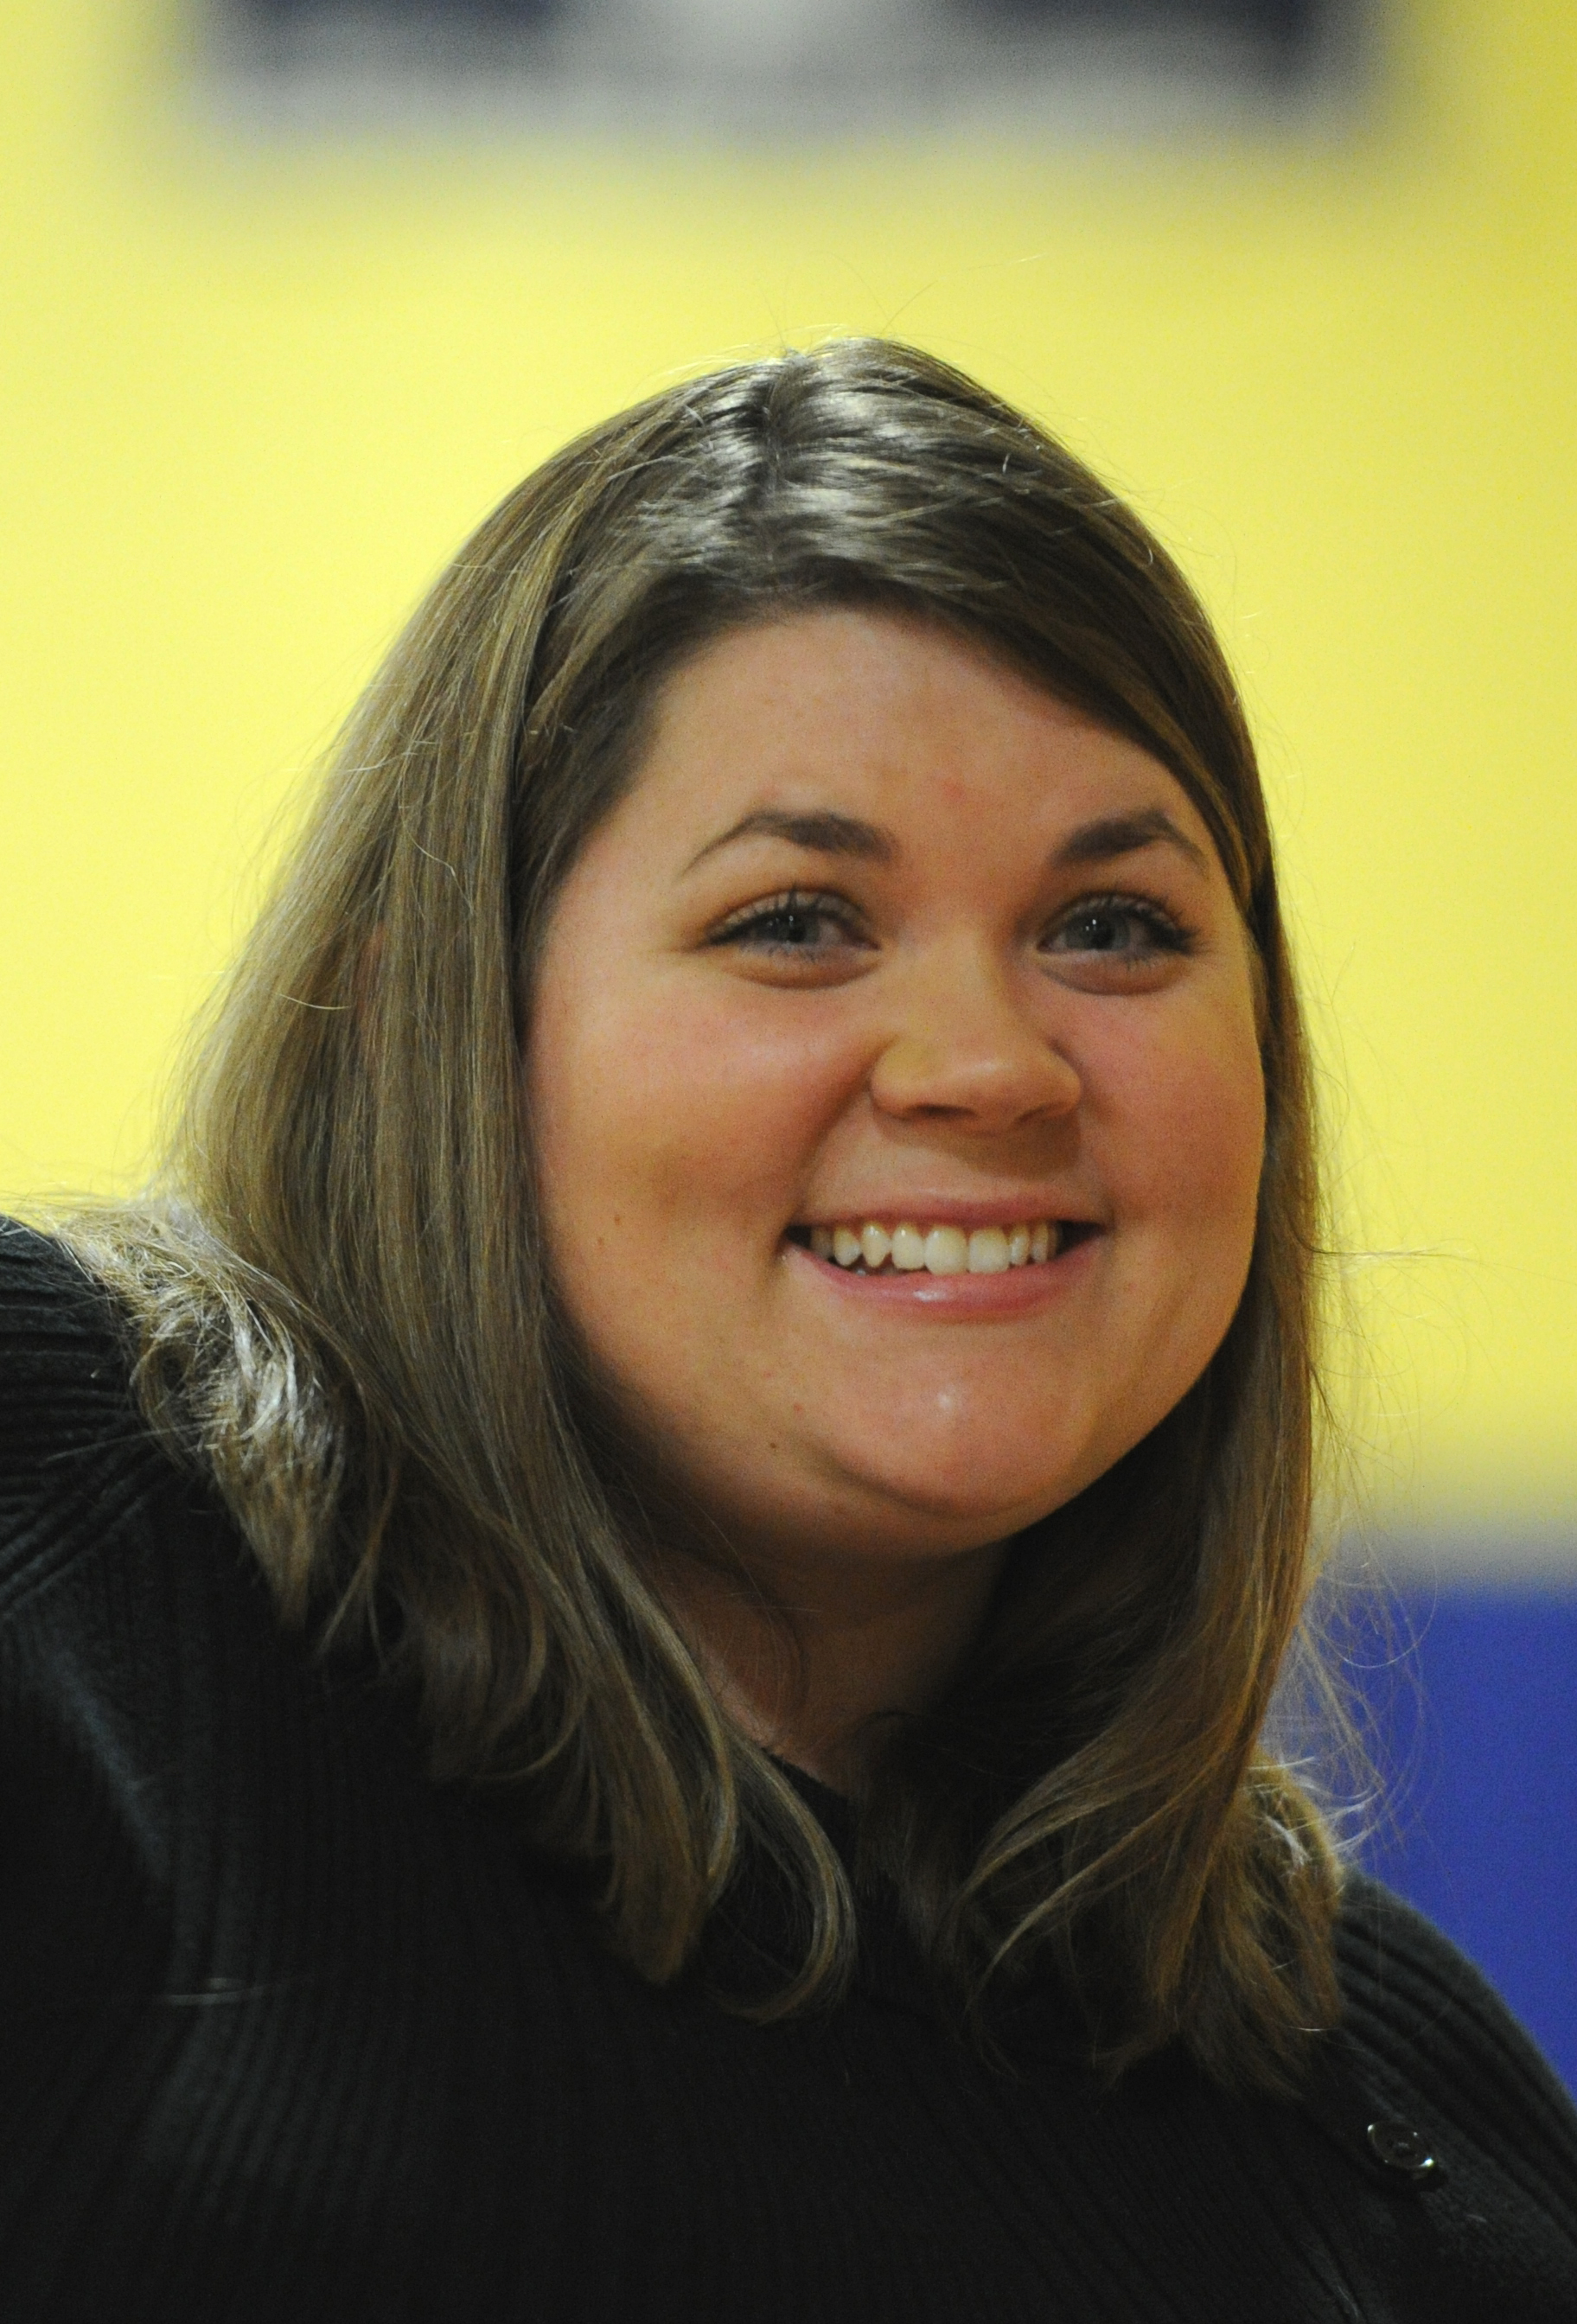 Medomak Valley Cheering coach Heather Simmons has been named 2021-2022 NFHS Maine Cheering Coach of the Year. (Paula Roberts photo, LCN file)